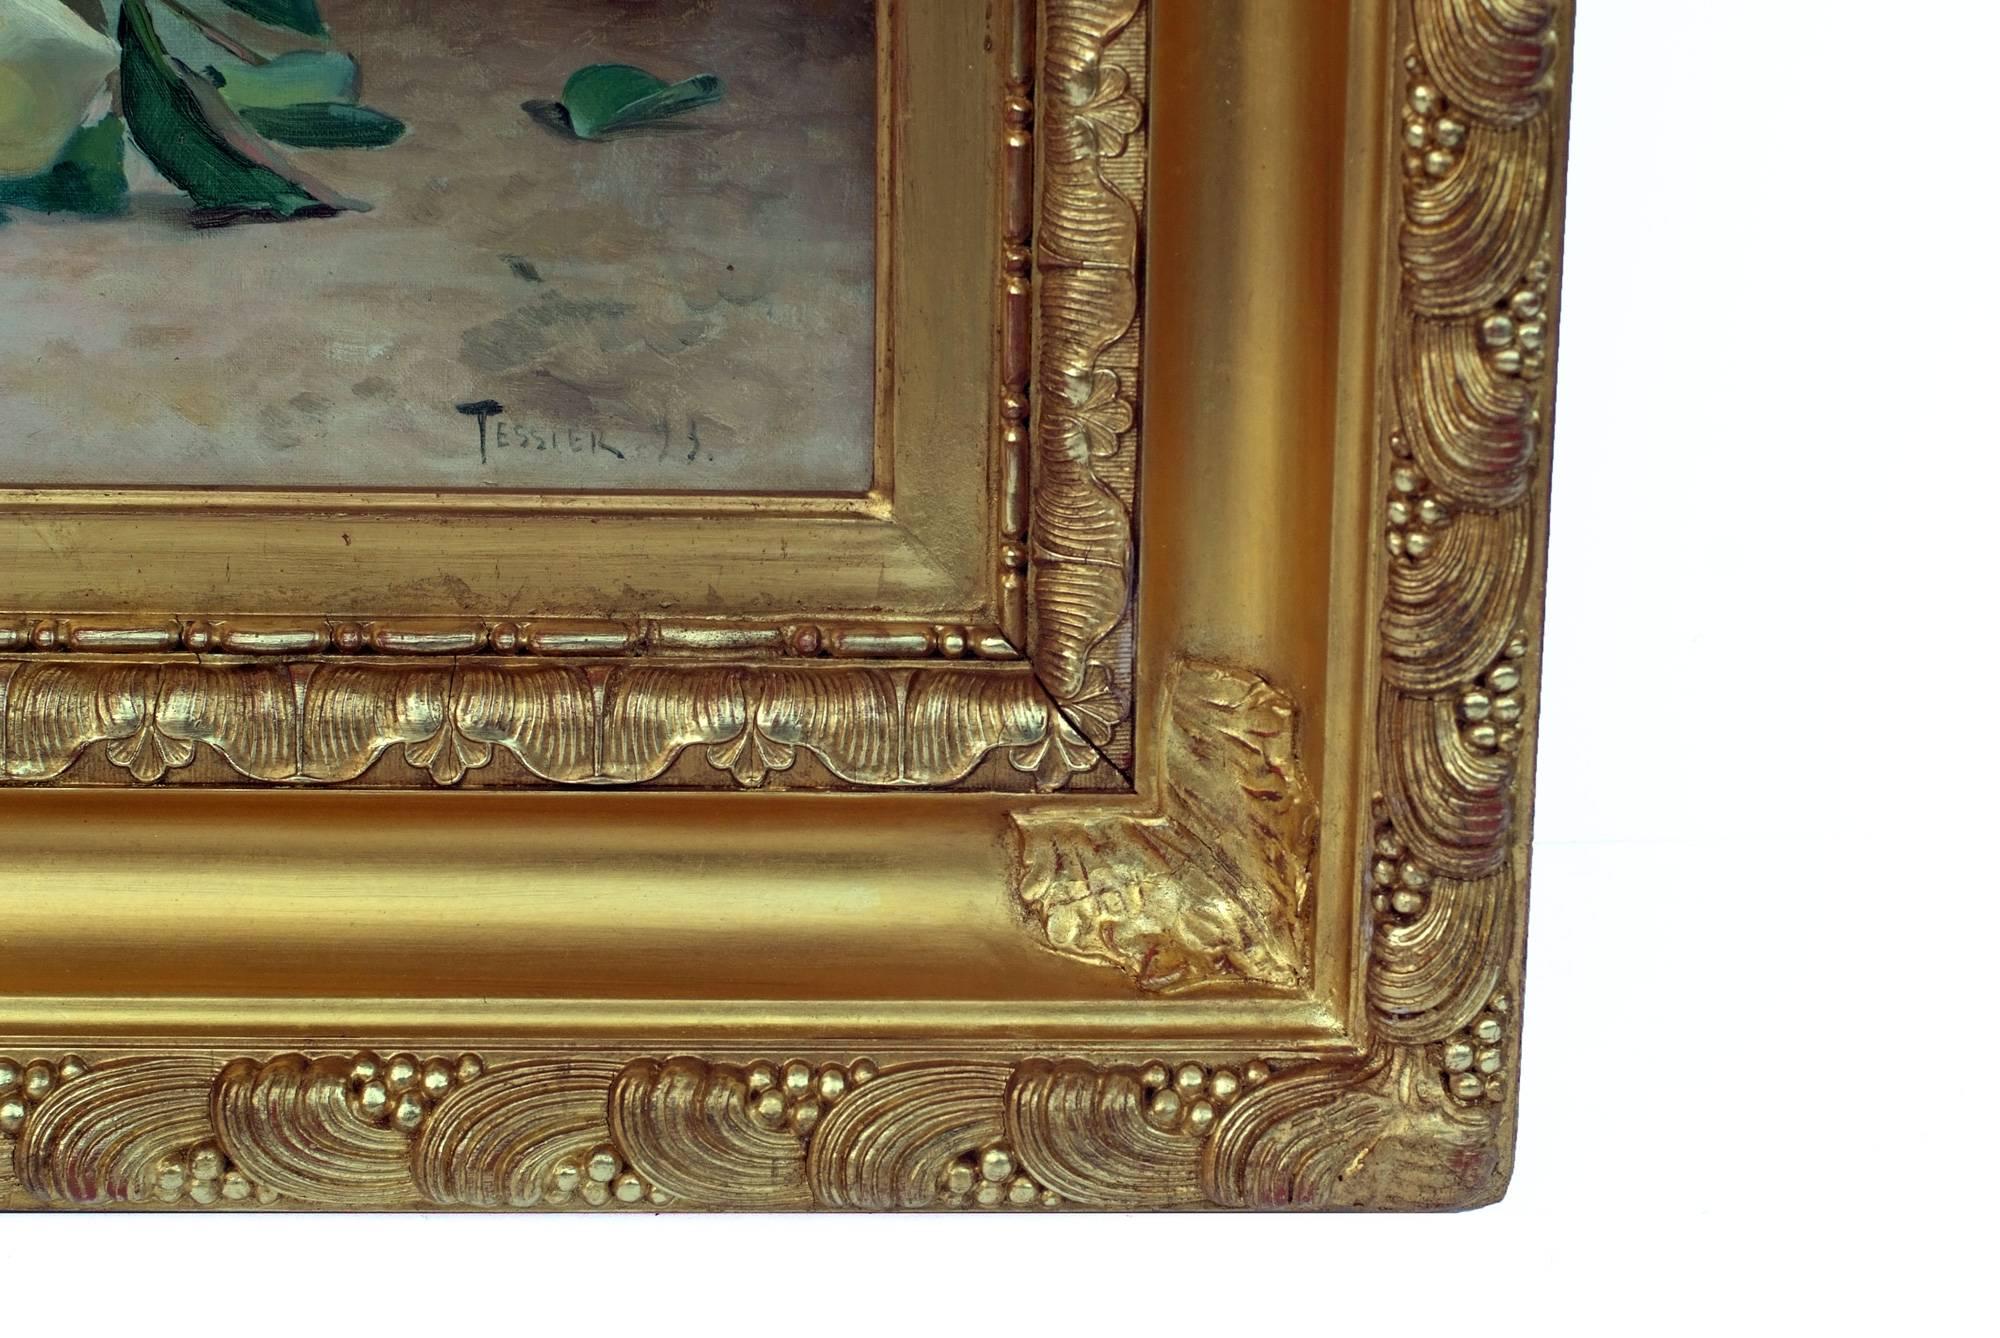 TESSIER Louis Adolphe (1858-1915)Flowers
Oil on canvas signed low right and dated 1893
Old original frame gilded with leaves
Dim canvas : 53 X 67 cm
Dim frame : 78 X 91 cm
Certificate of authenticity

TESSIER Louis Adolphe (1858-1915)
Painter born